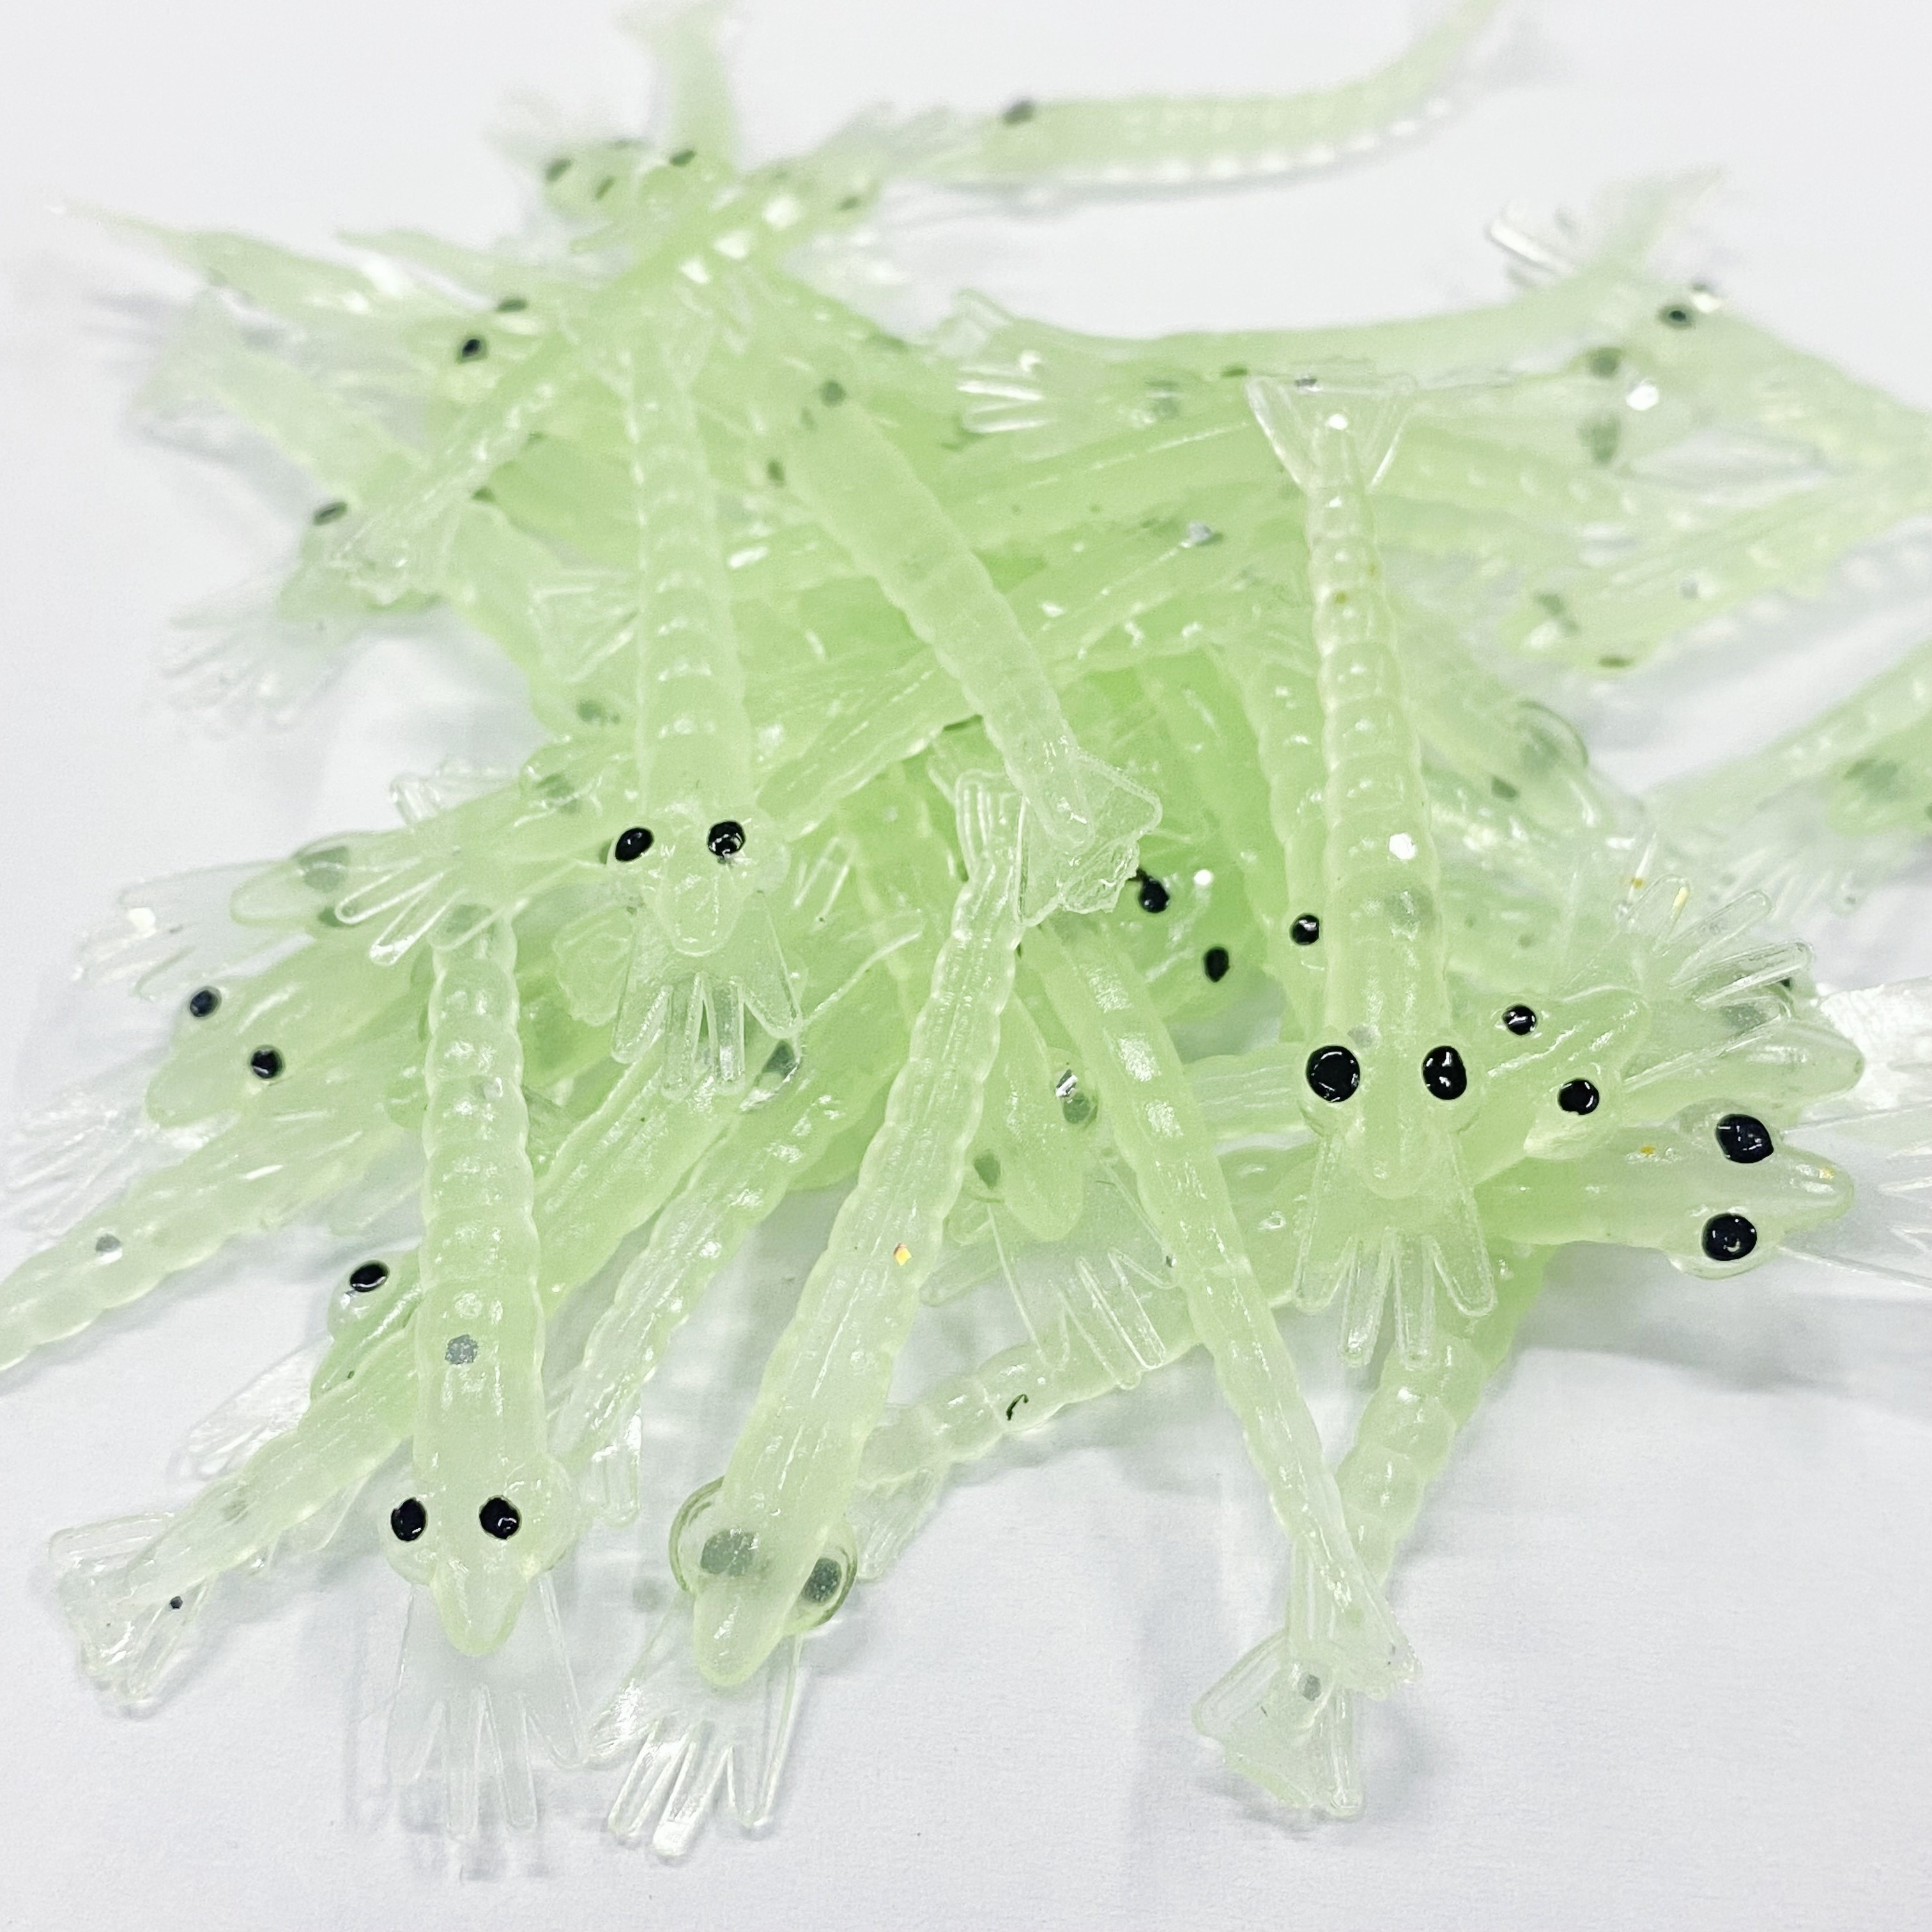 50pcs Fishing Soft Lures: Glow Shrimp, Grub Worms & More - Perfect for  Bass, Walleye, Trout & Crappie!